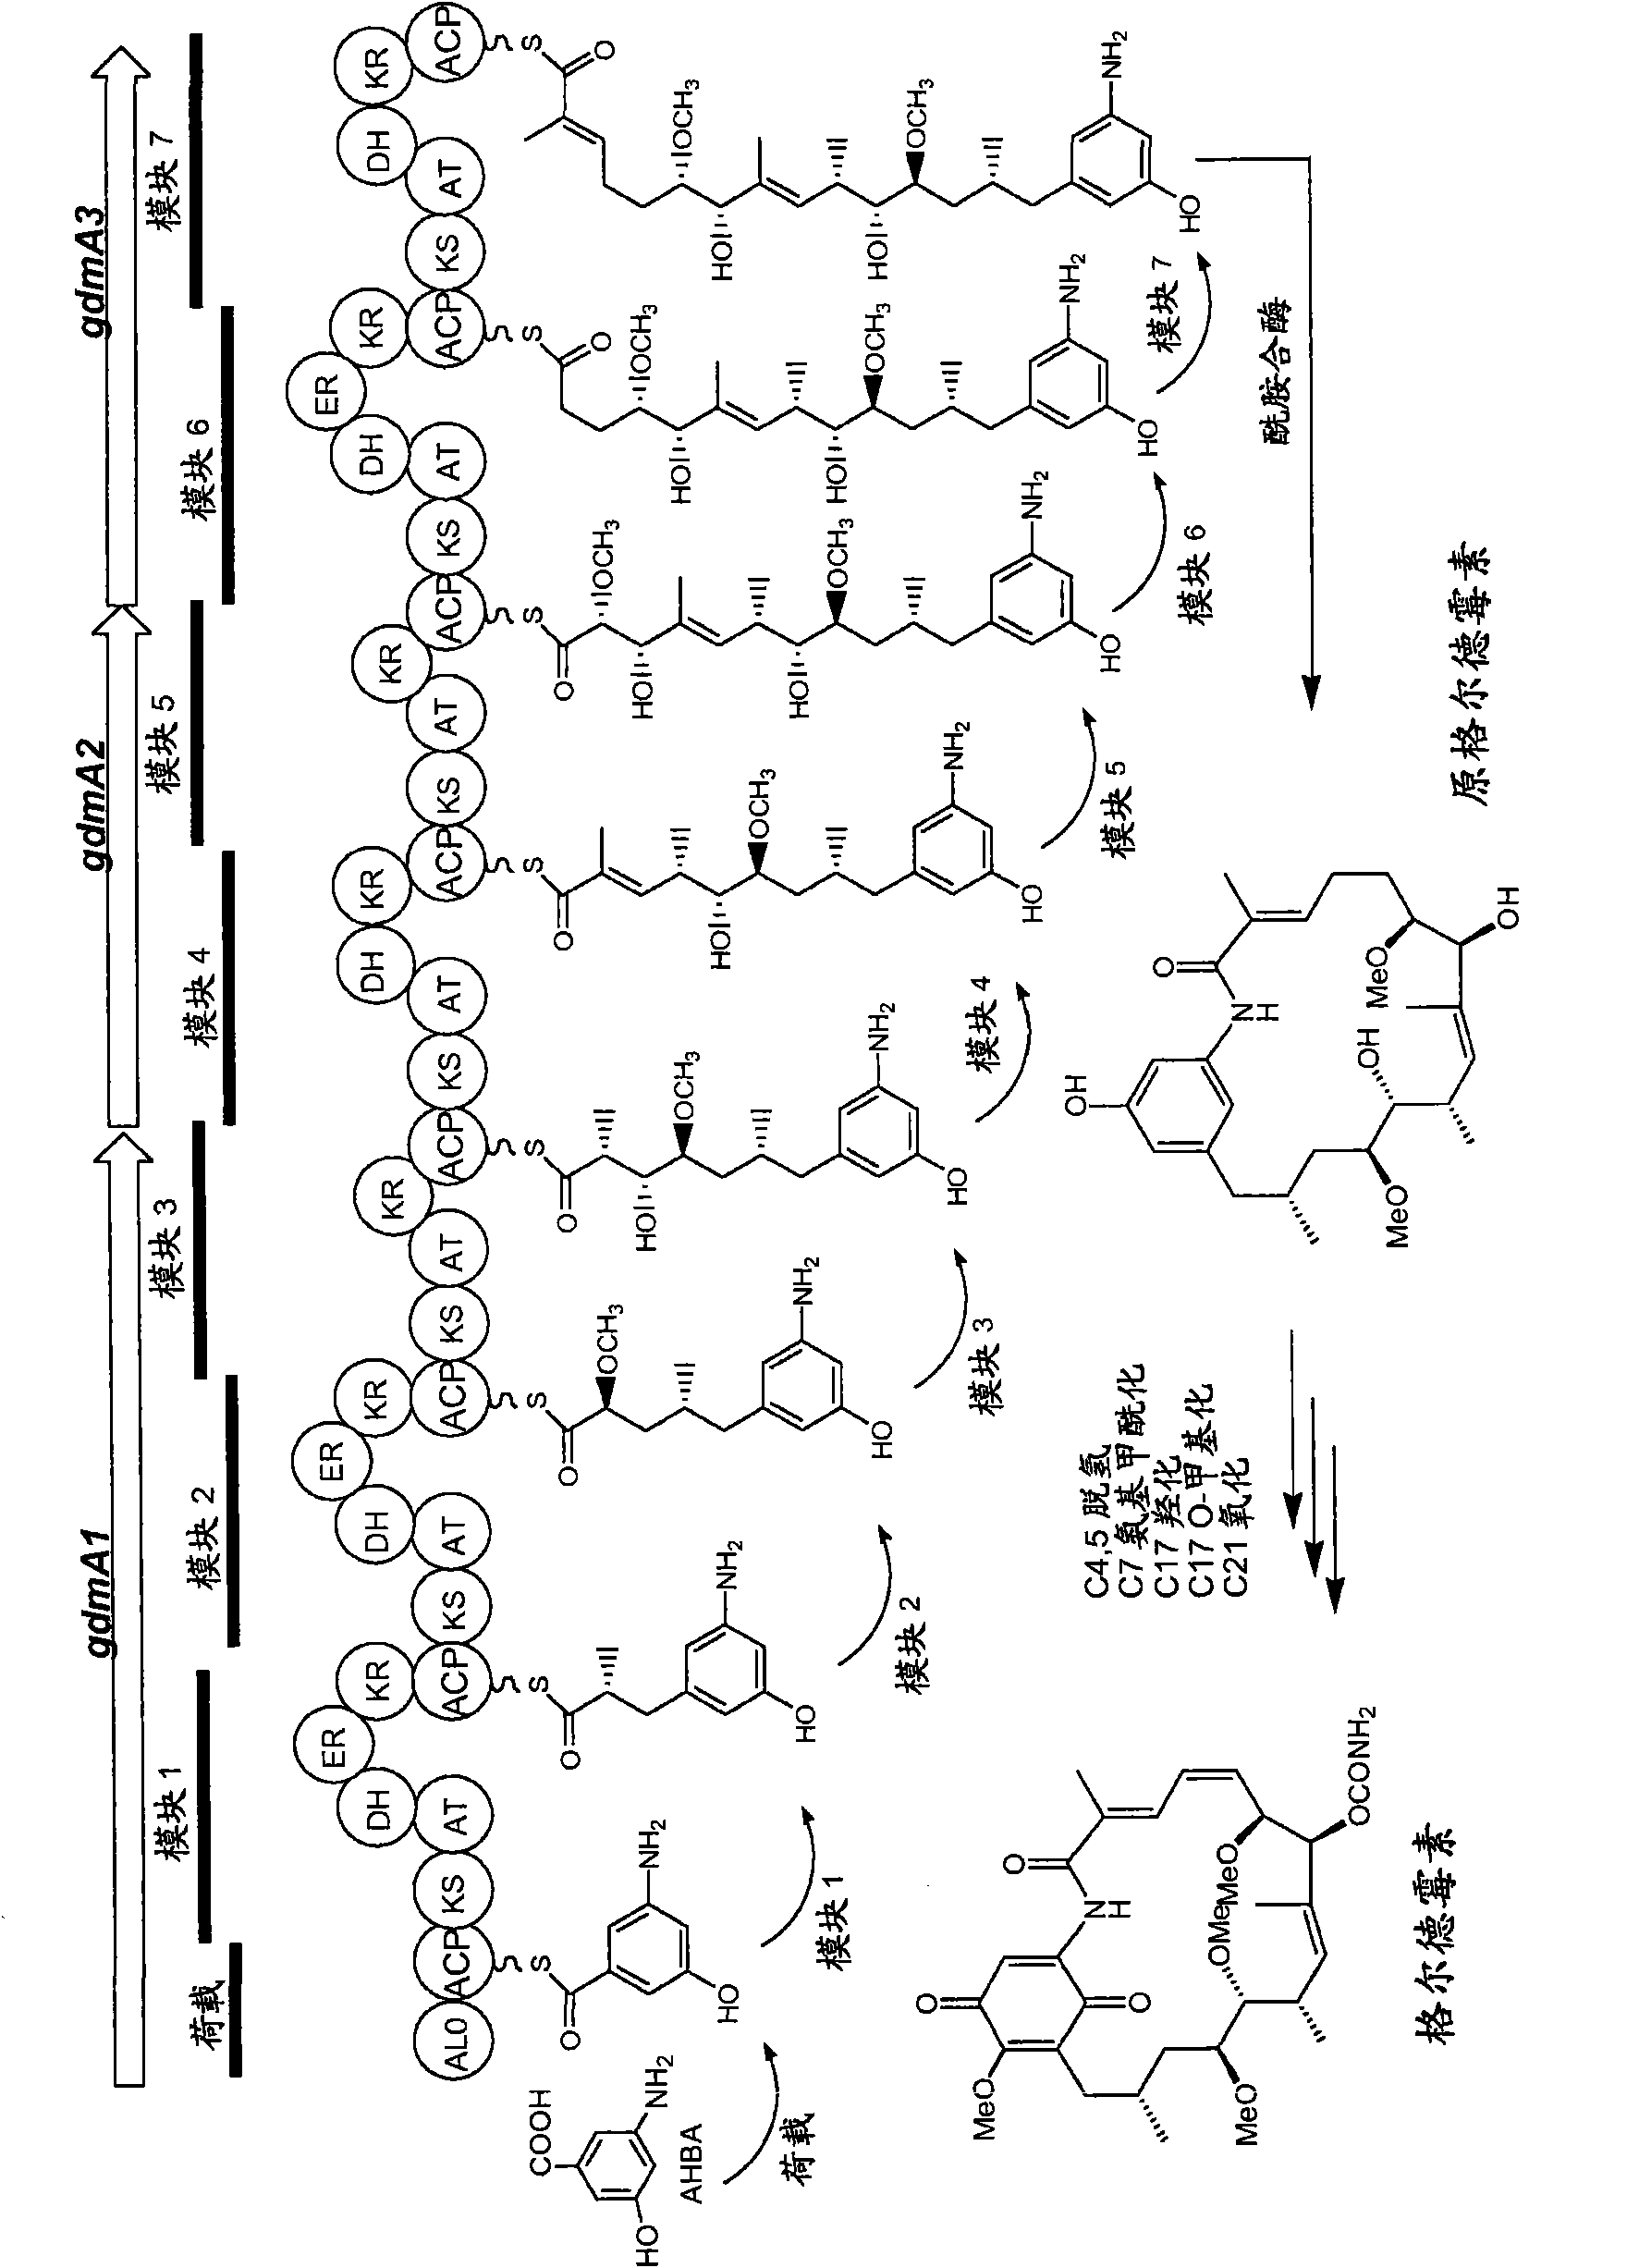 Novel compounds and methods for their production